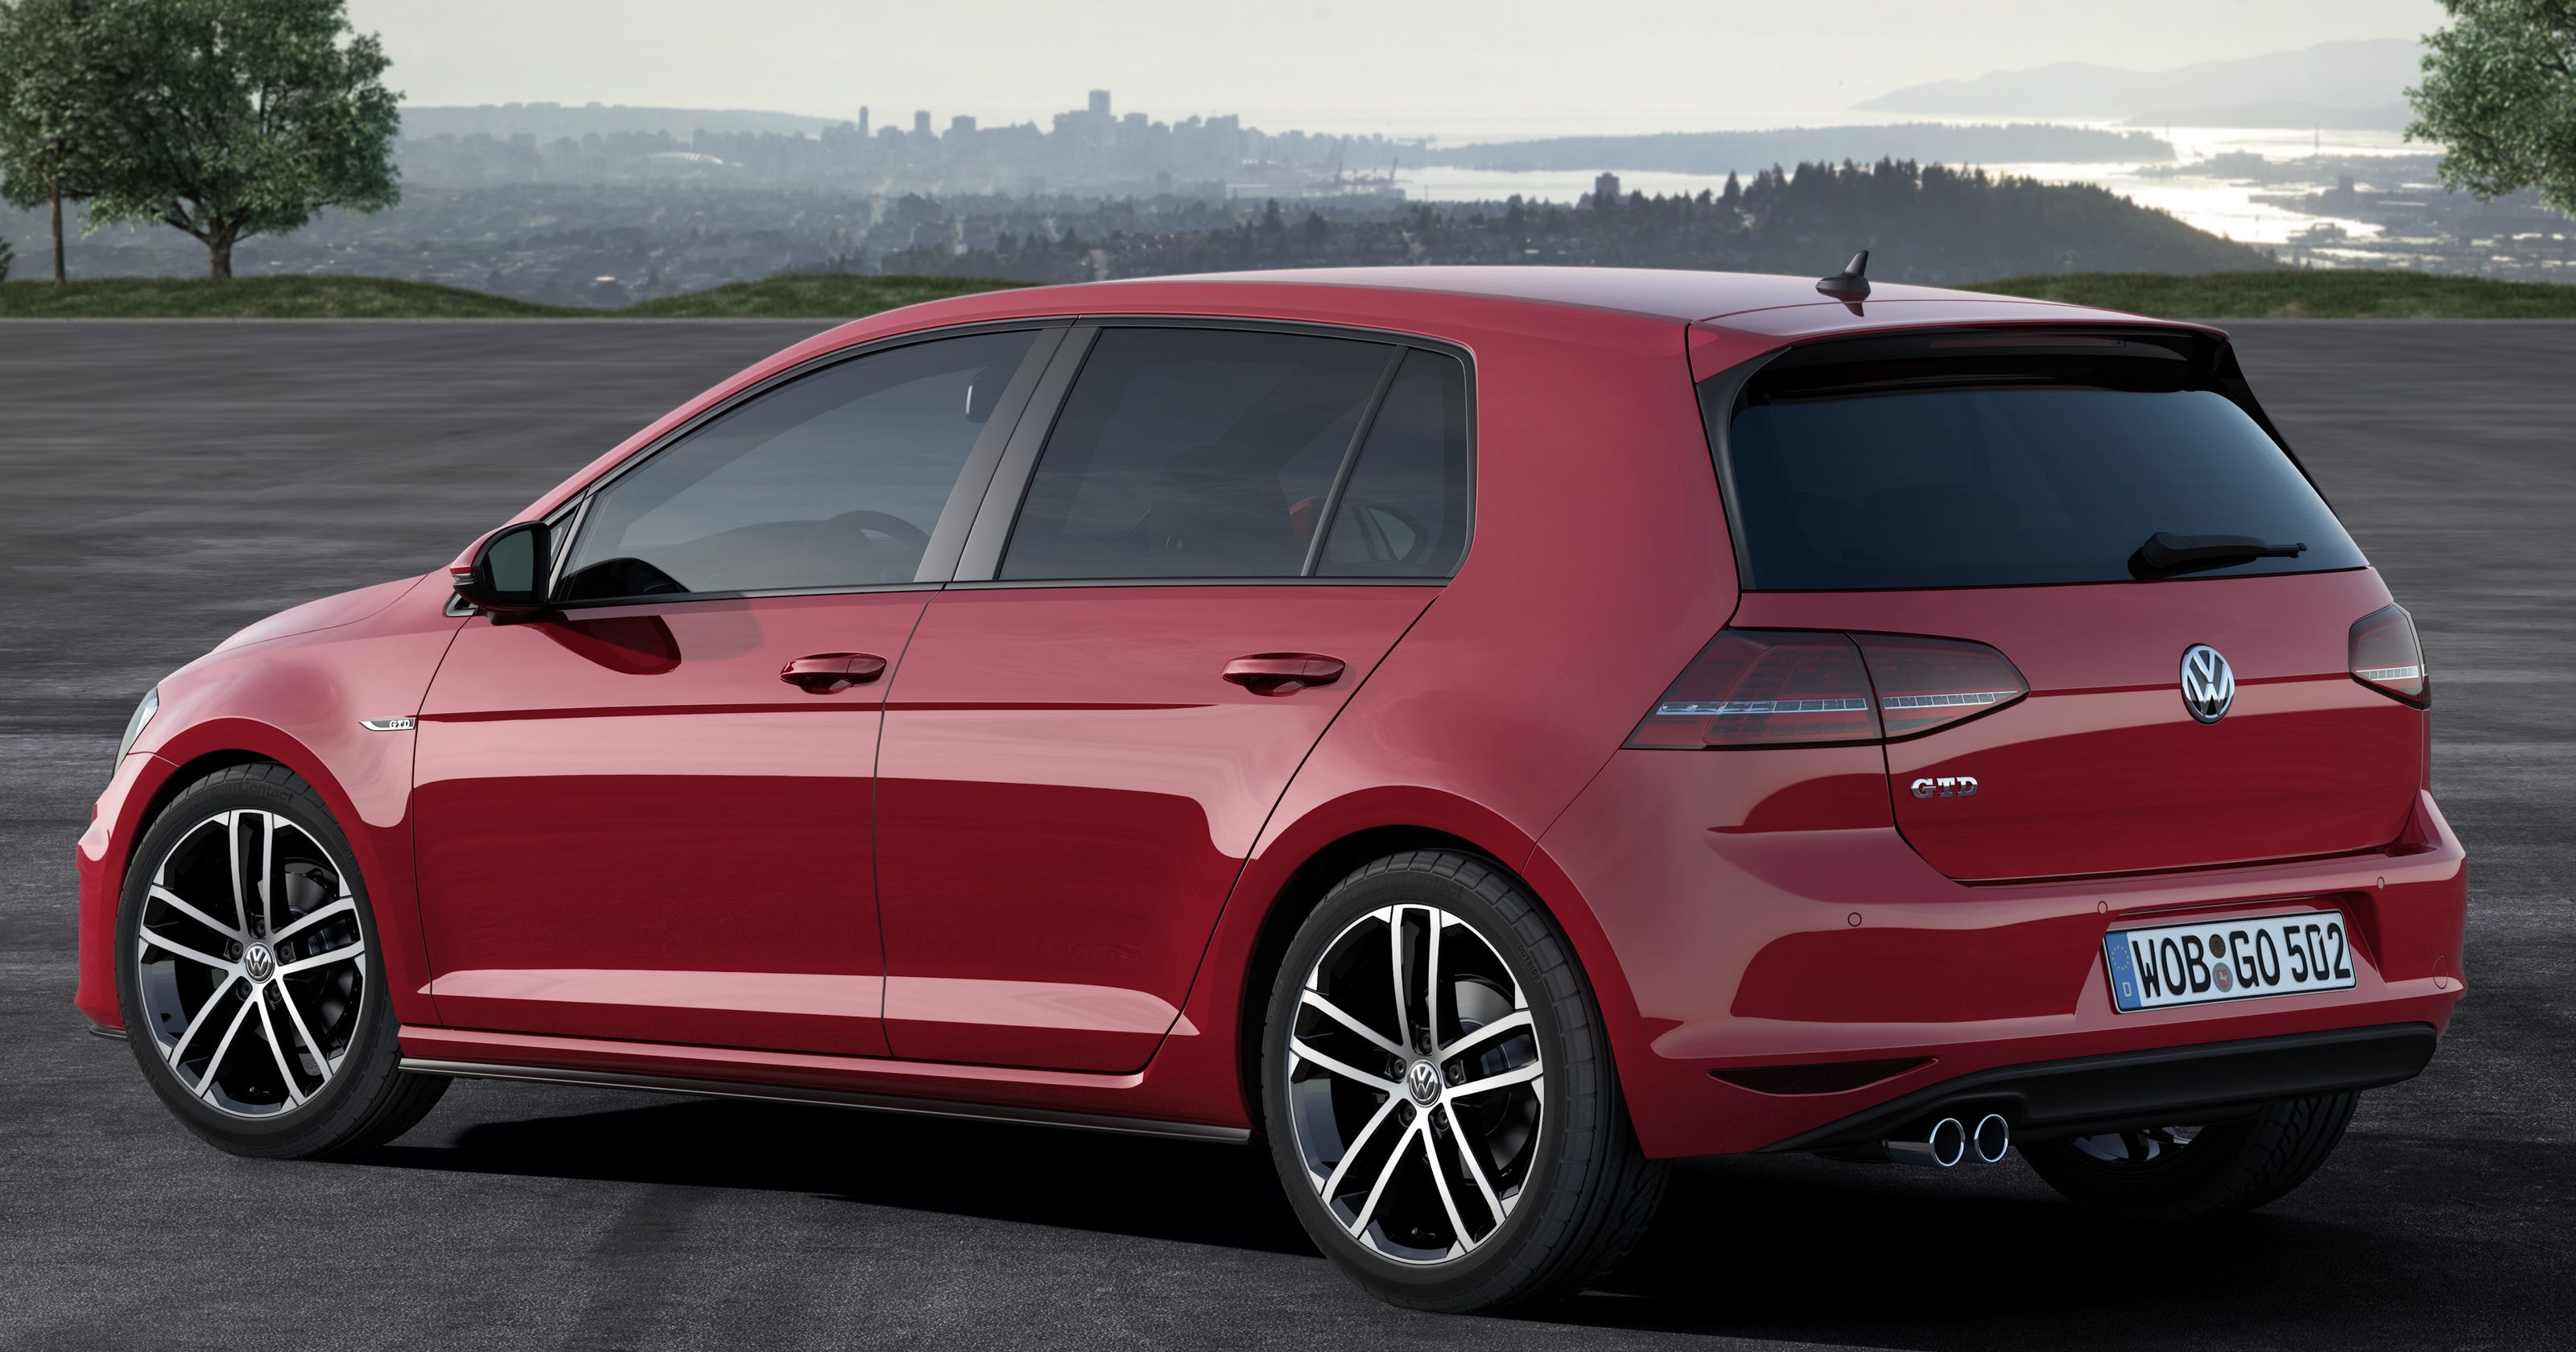 VW uncovers sporty diesel Golf for Europe